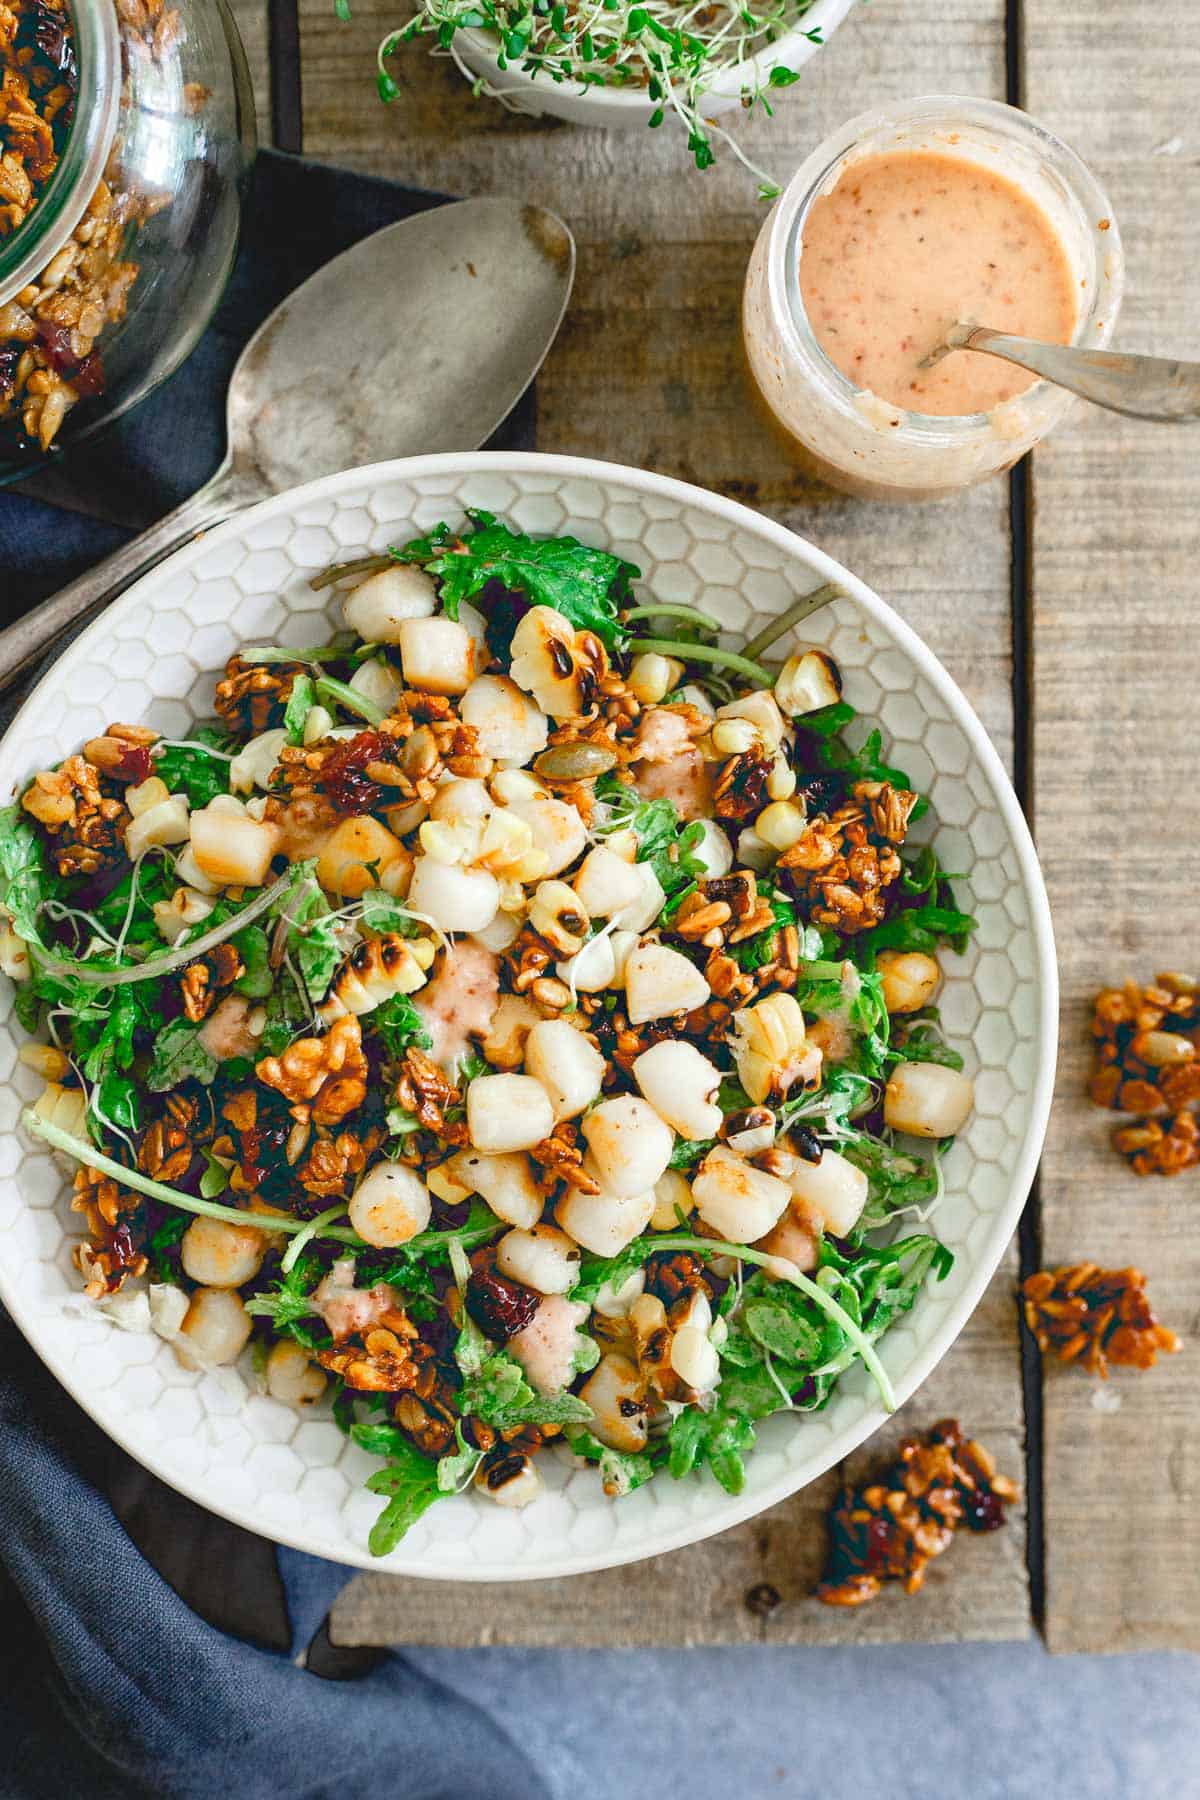 This bay scallop baby kale corn salad is served with a savory tart cherry granola and a cherry dijon dressing. Eating well in the summer never looked so good!